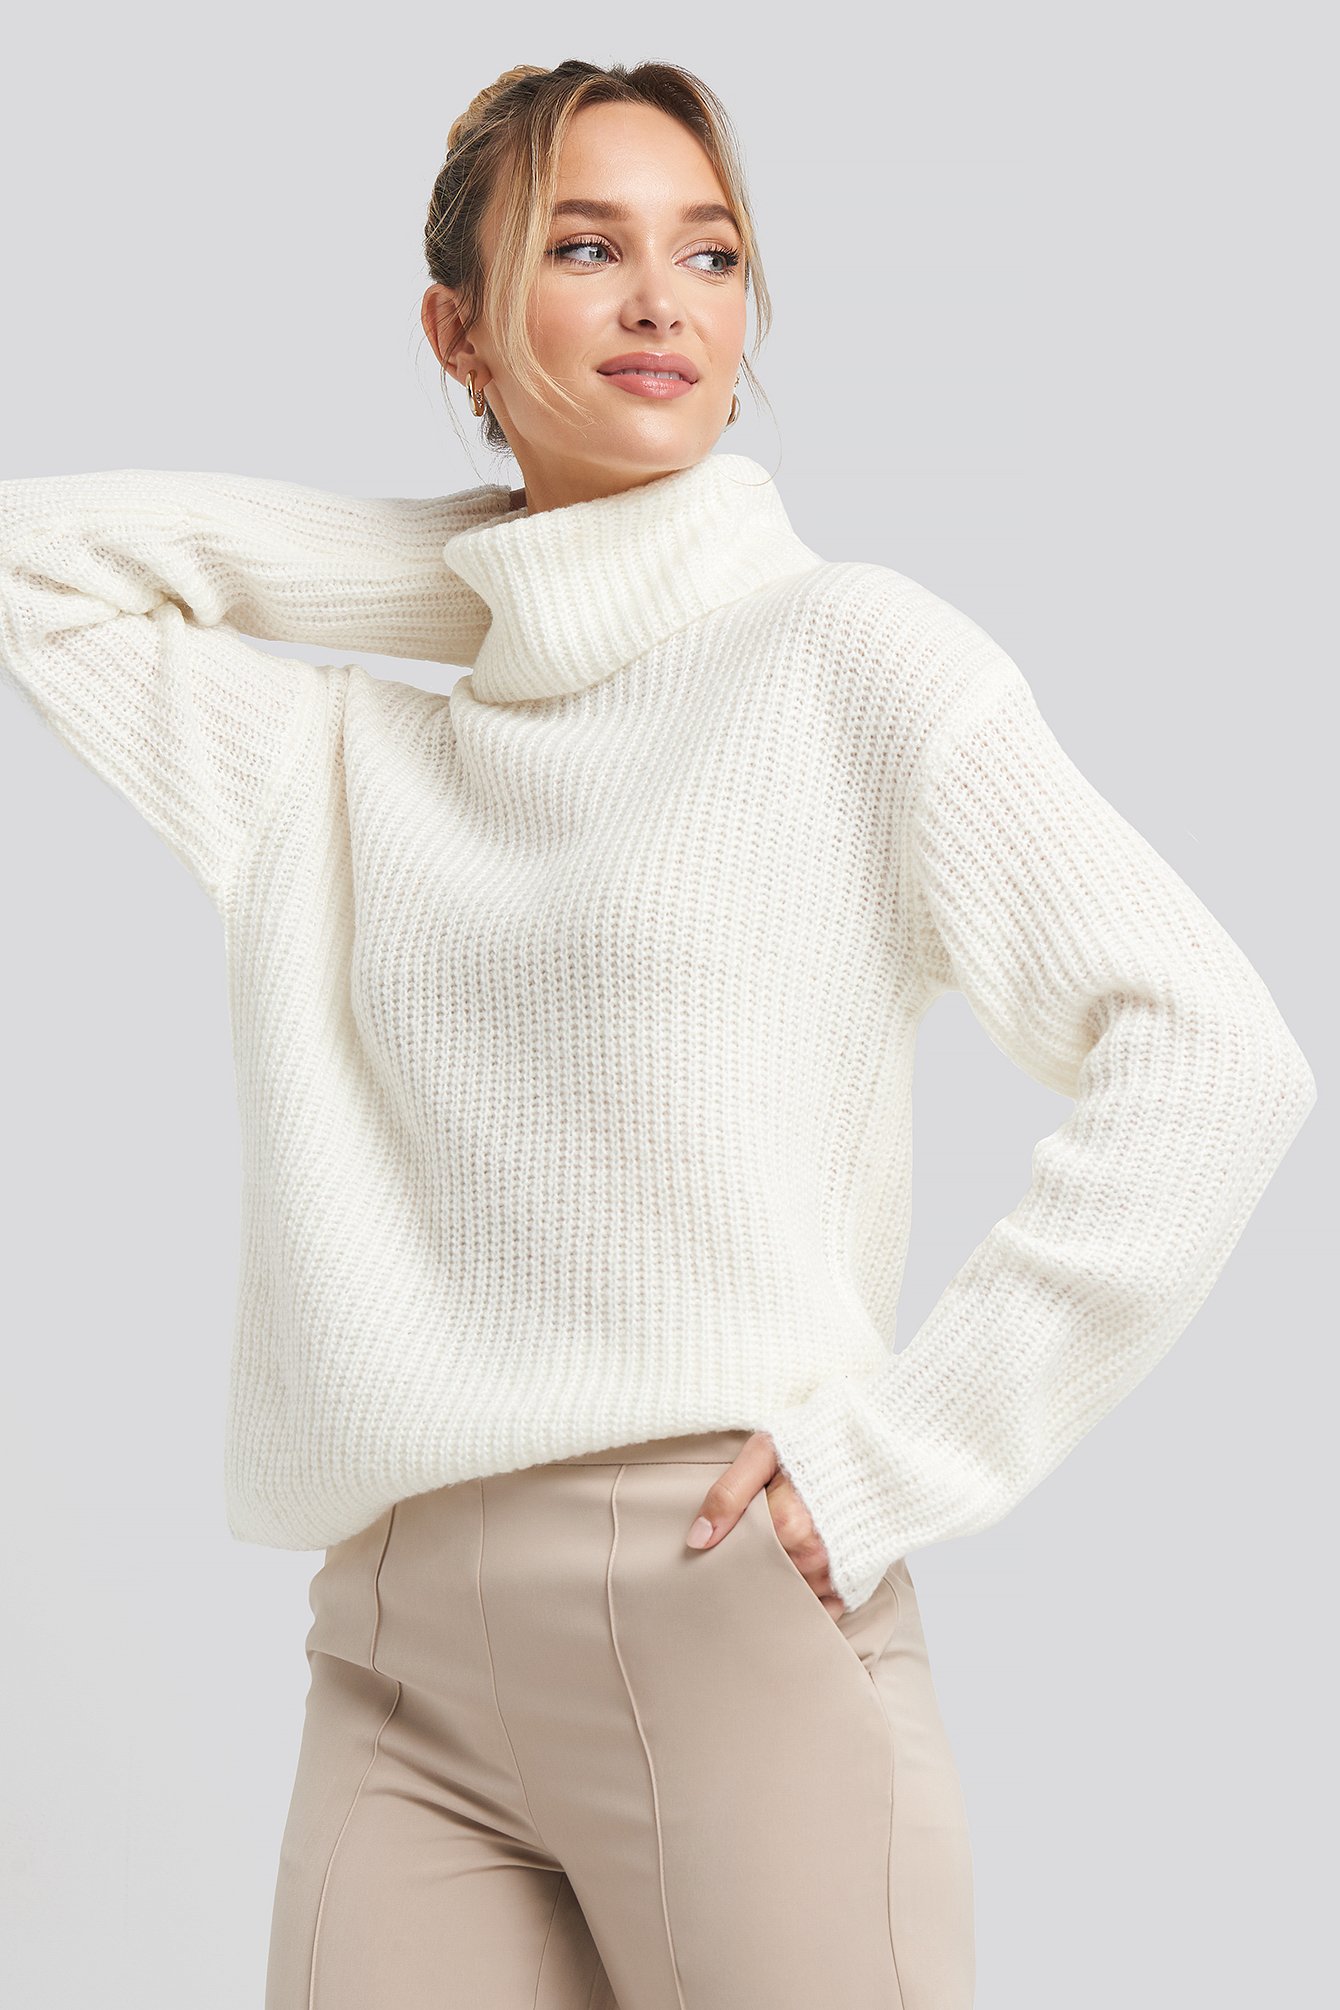 White Big Turtleneck Knitted Sweater